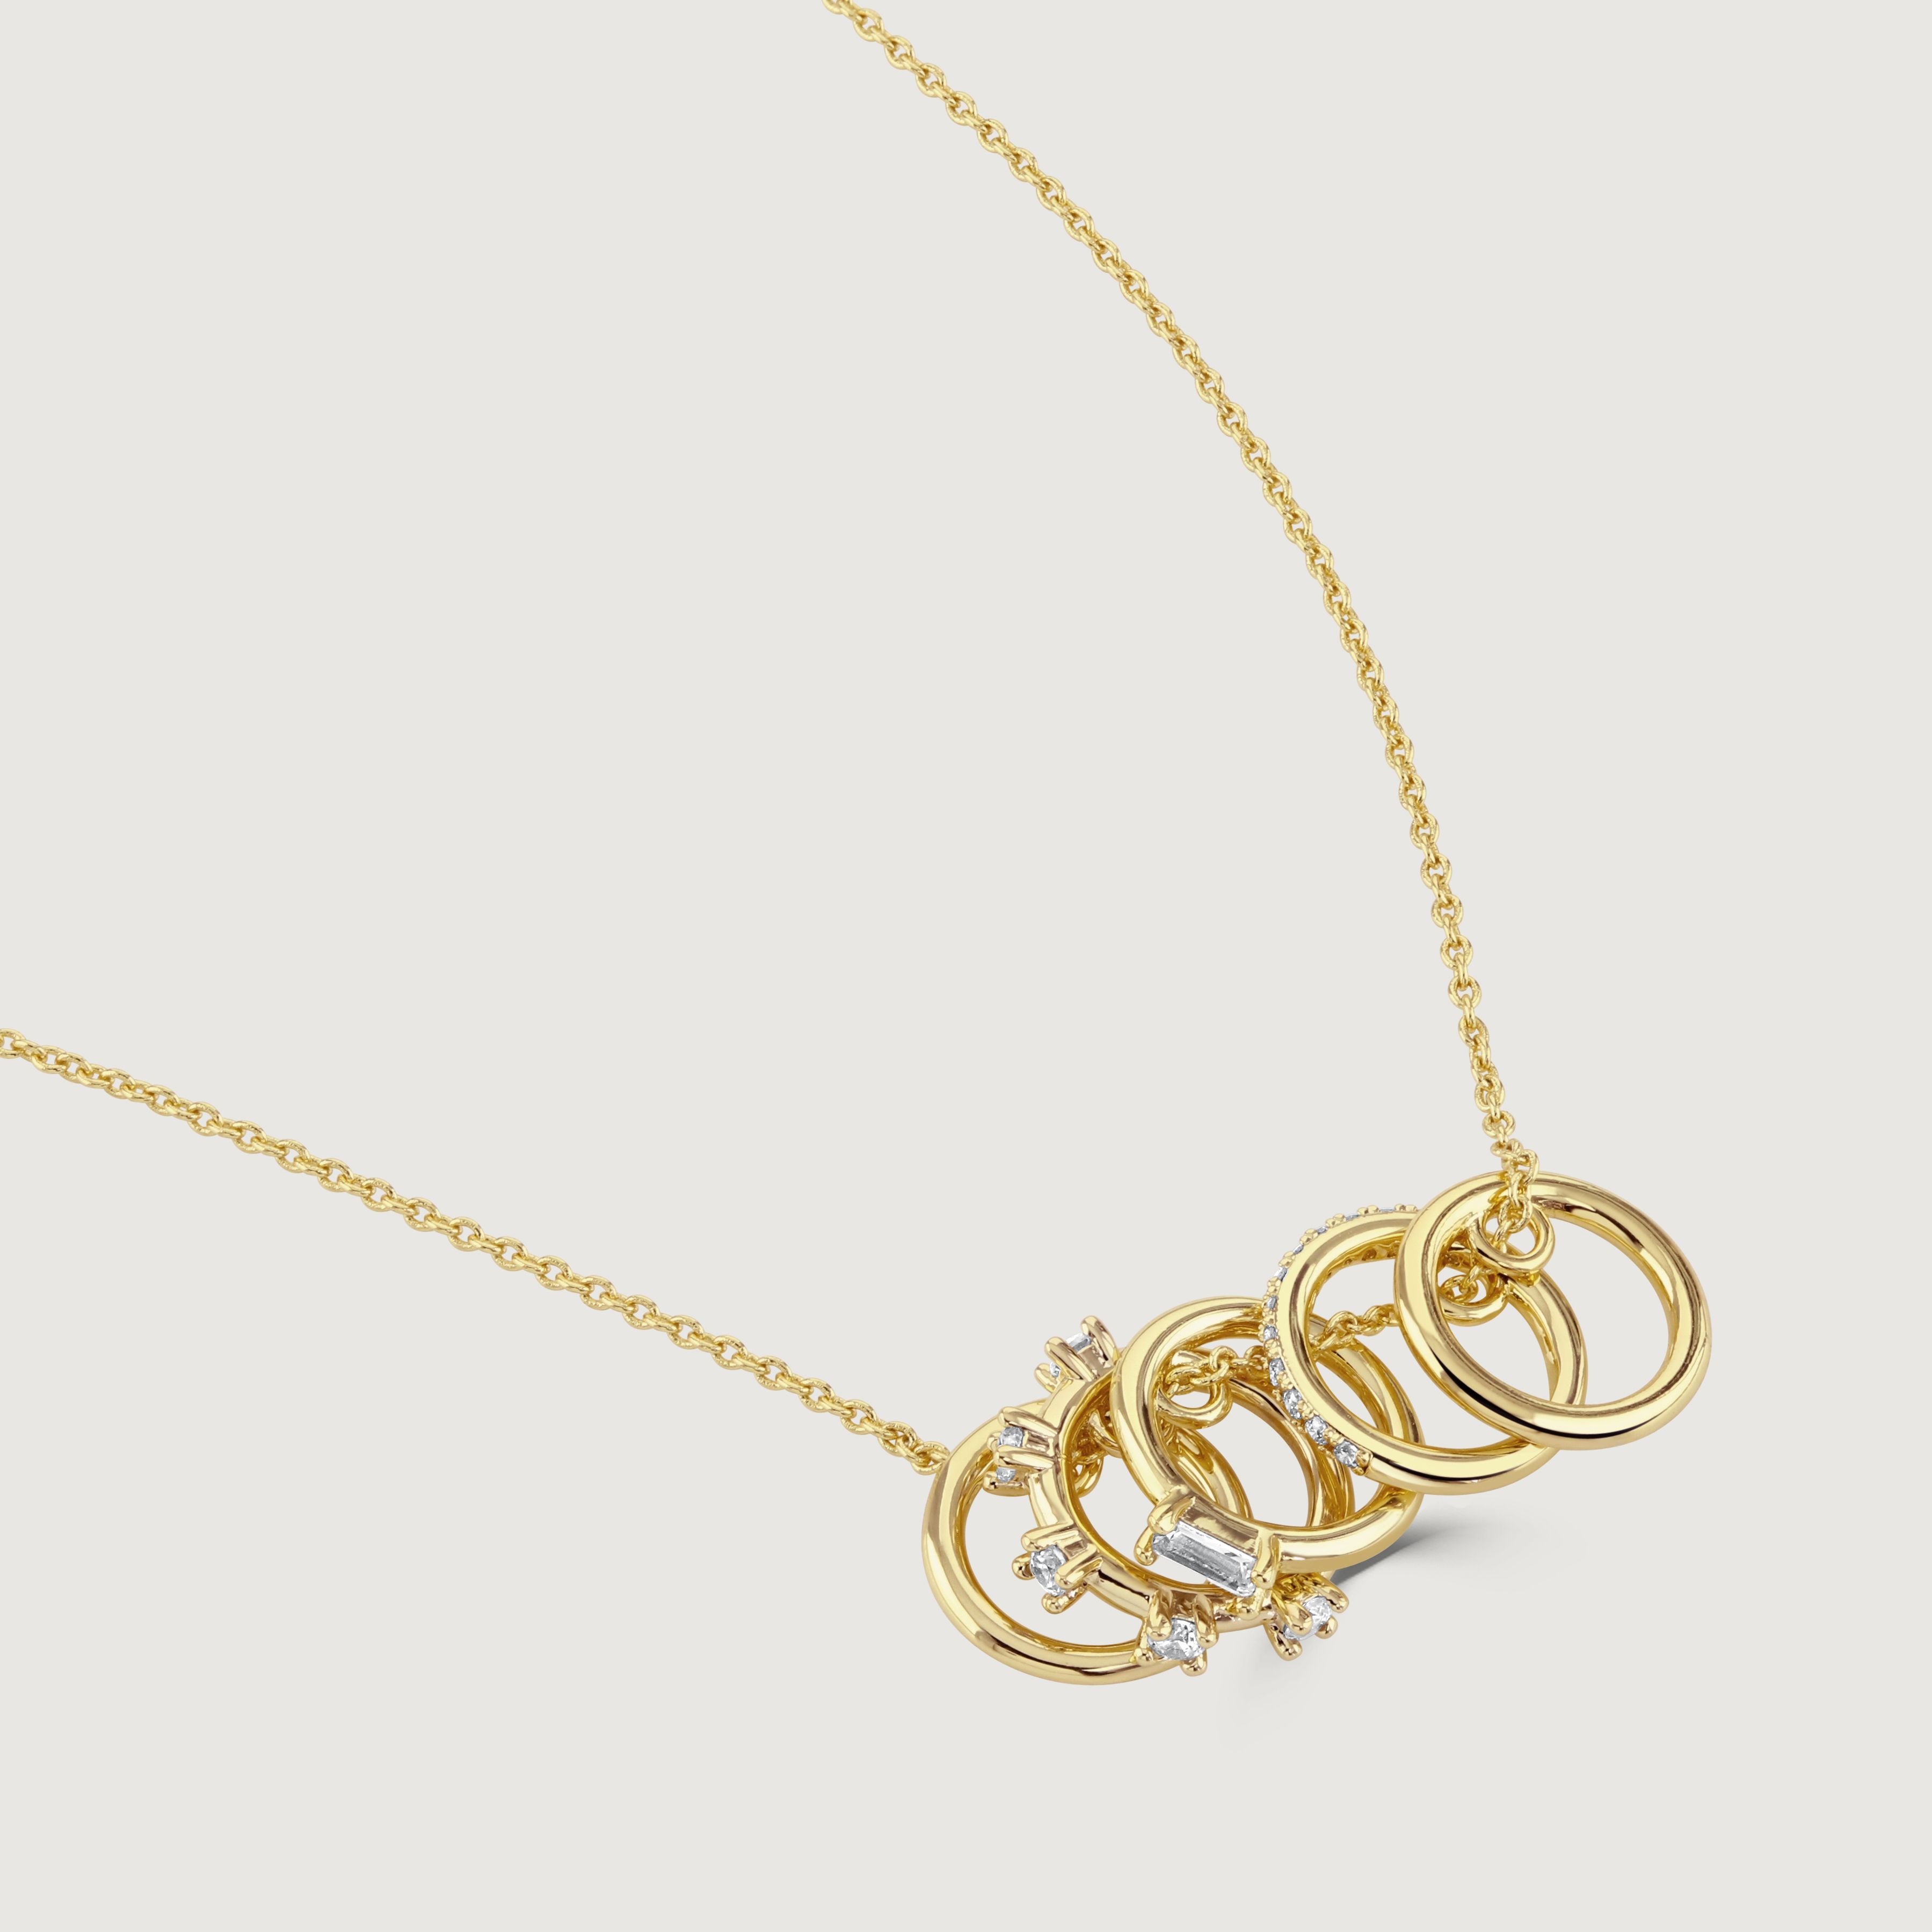 The crystal hoop pendant is a subtle way to introduce texture into your jewellery as it offers a contemporary twist on a timeless design. Teamed with a delicate chain, the plain and crystal band act as a great statement piece. 
